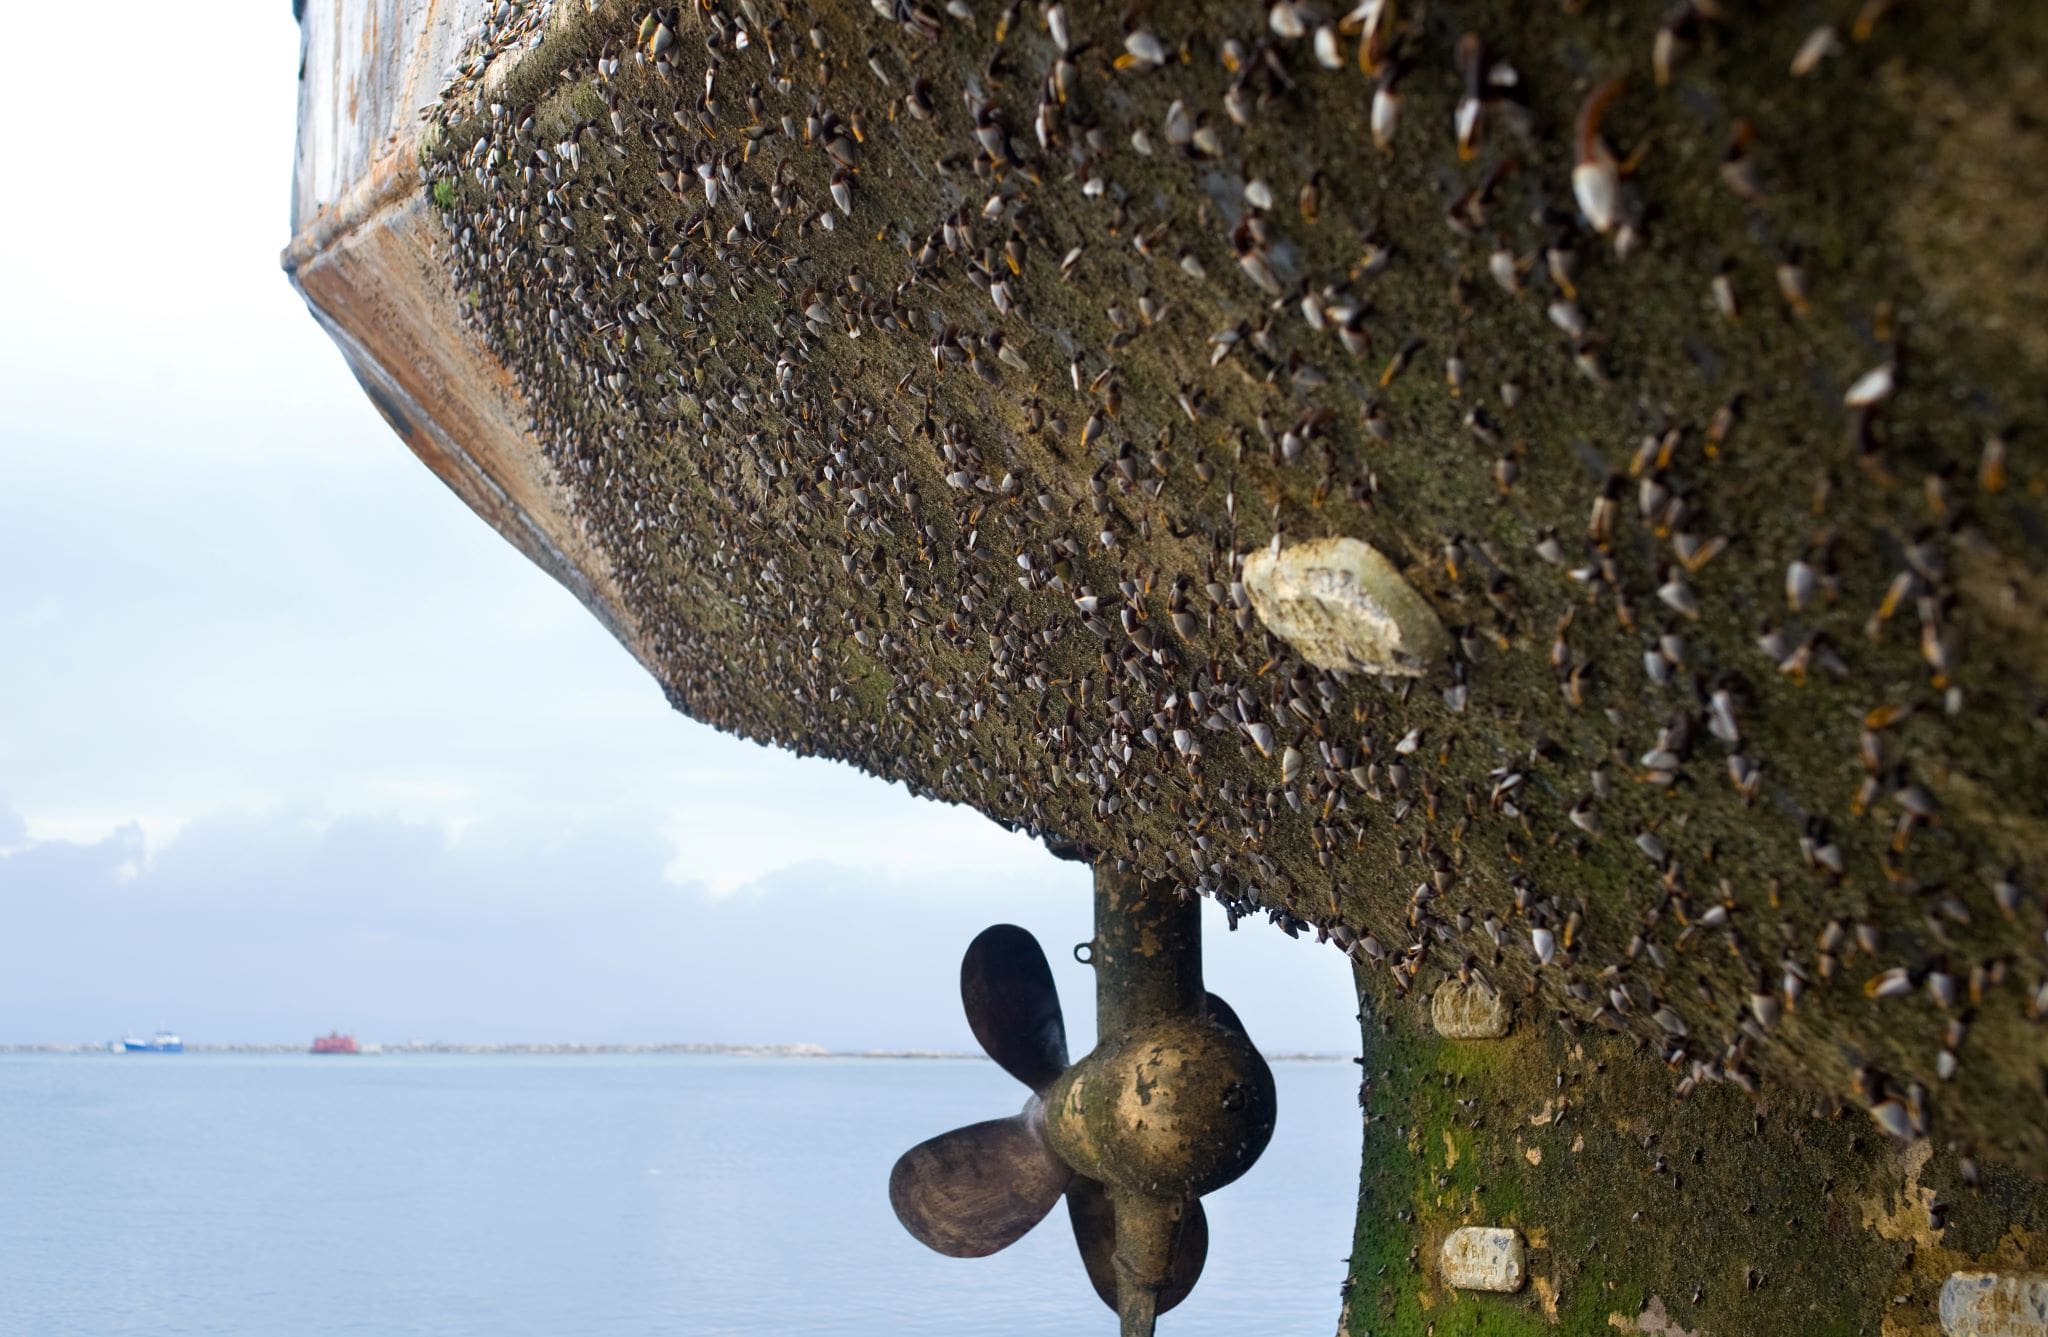 marine fouling on a ship's hull and propeller